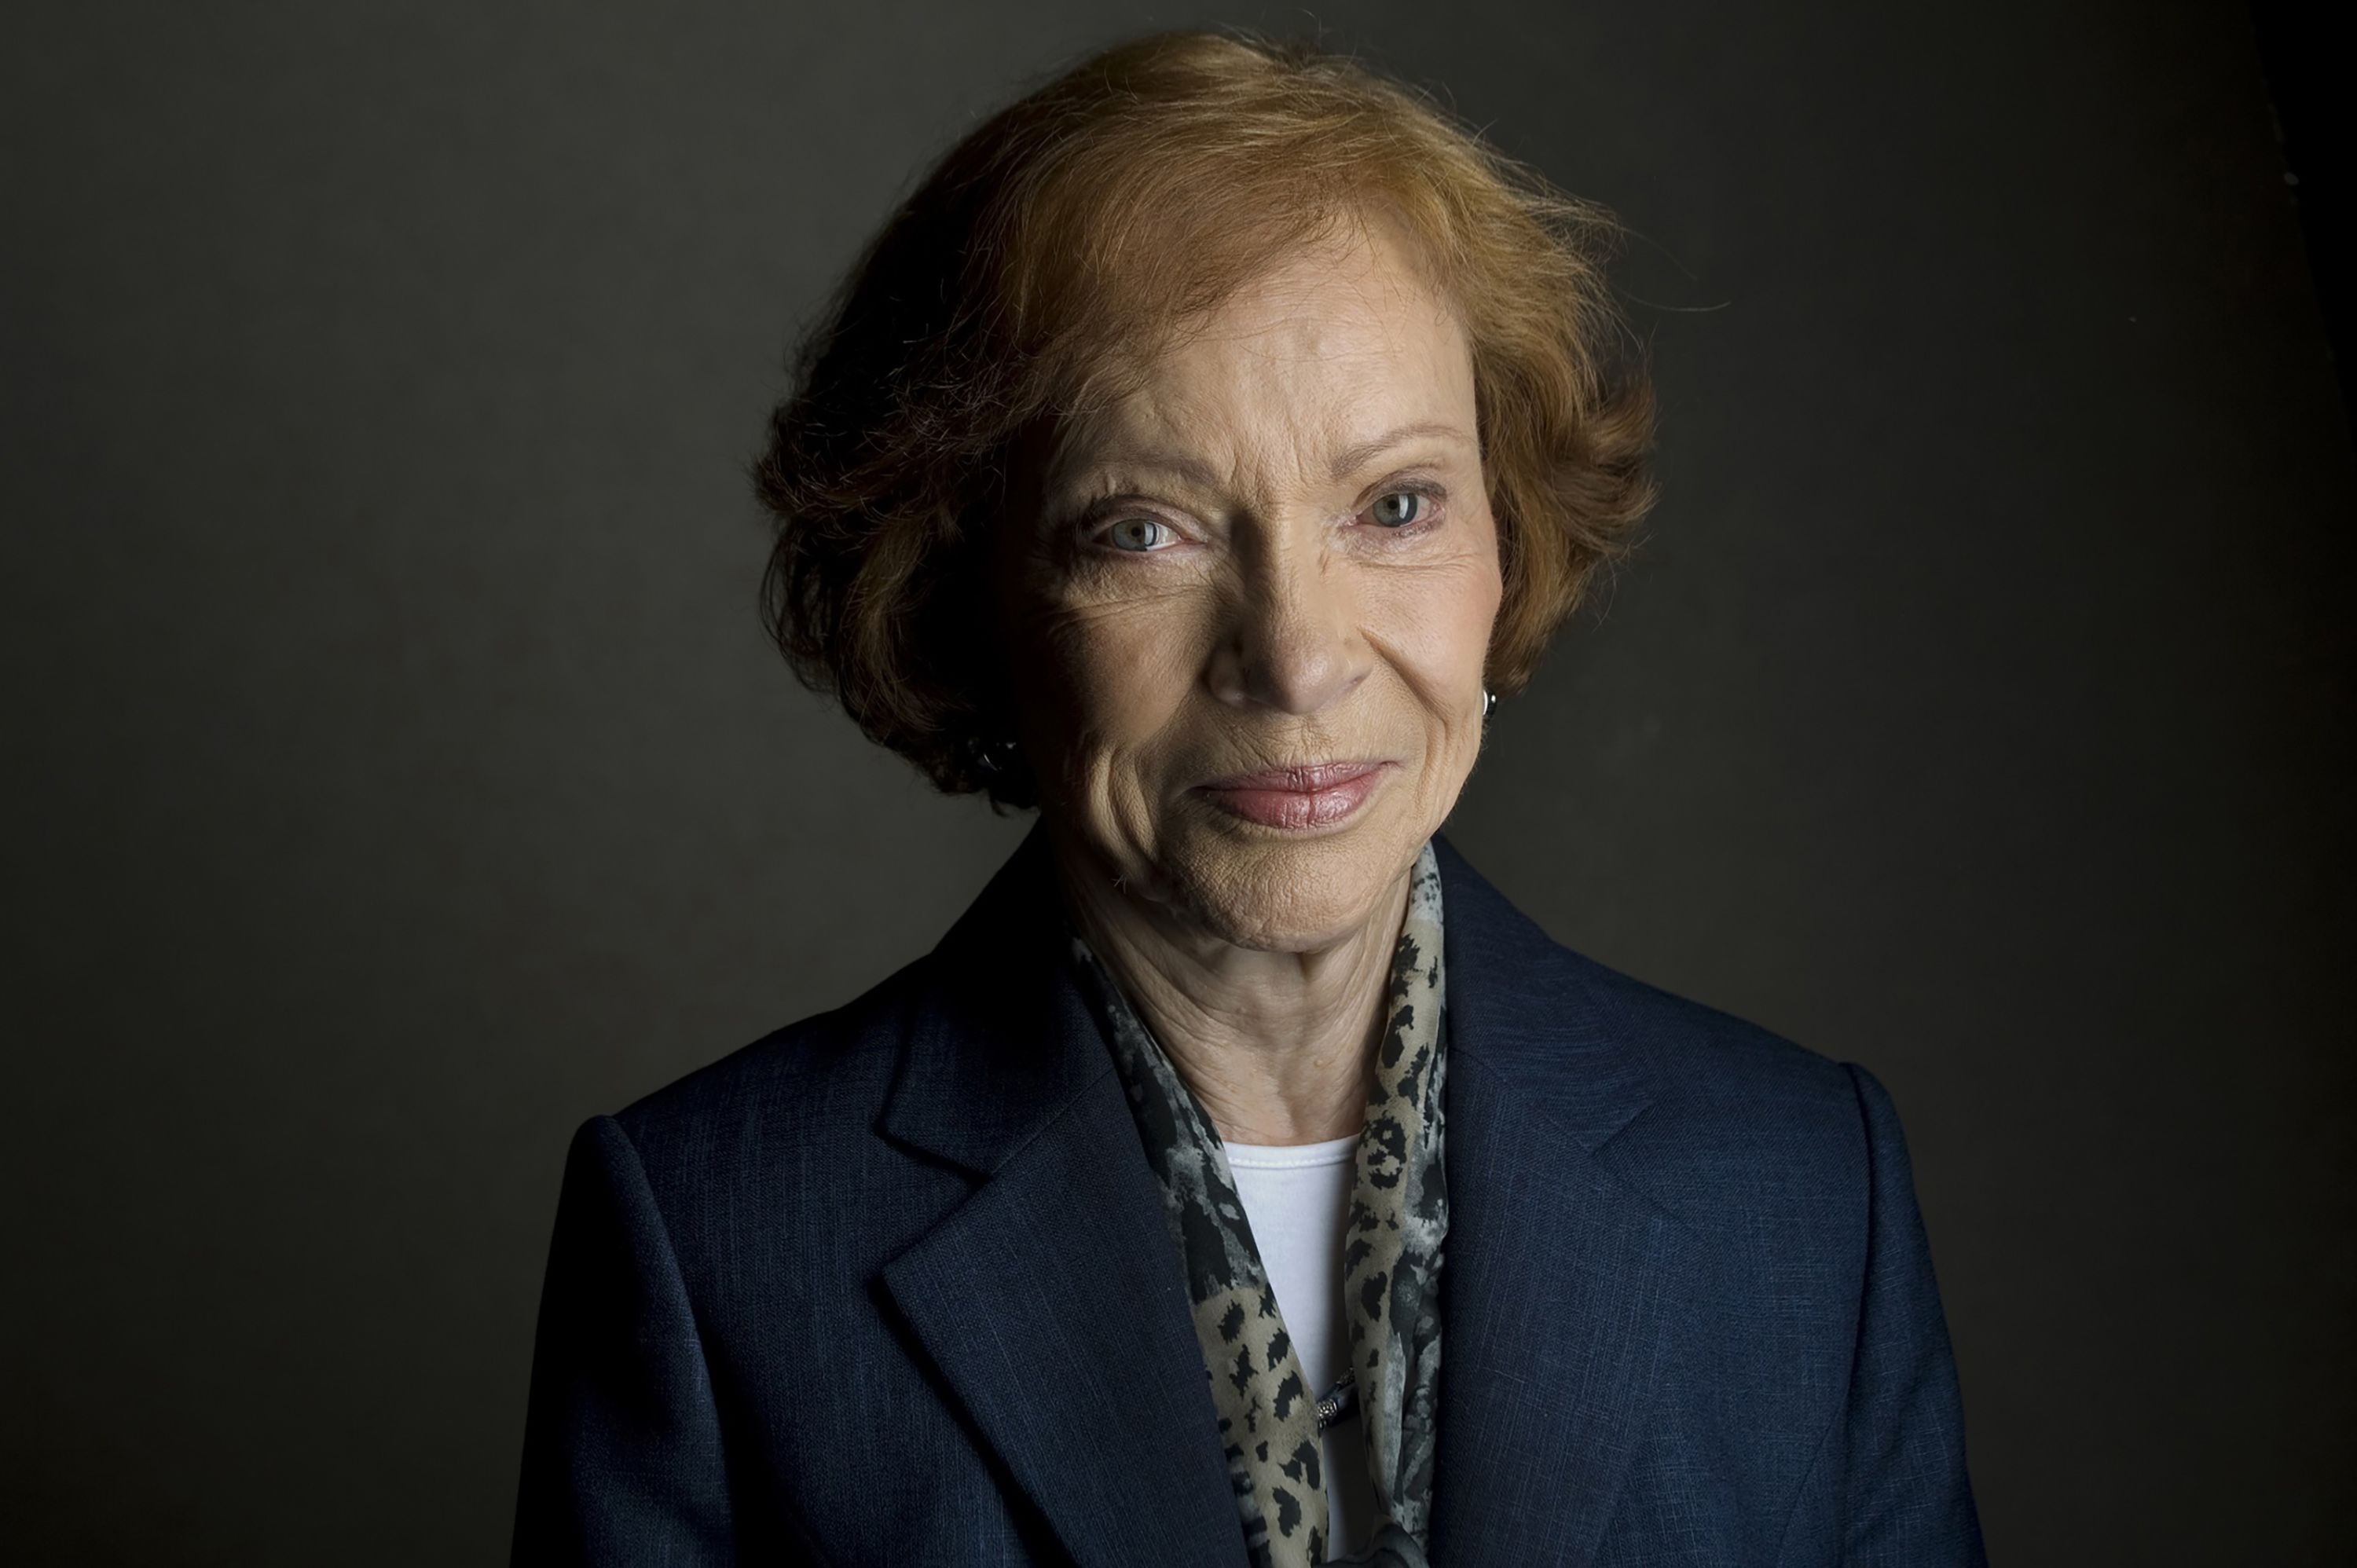 Former first lady Rosalynn Carter poses for a portrait in New York in 2011.